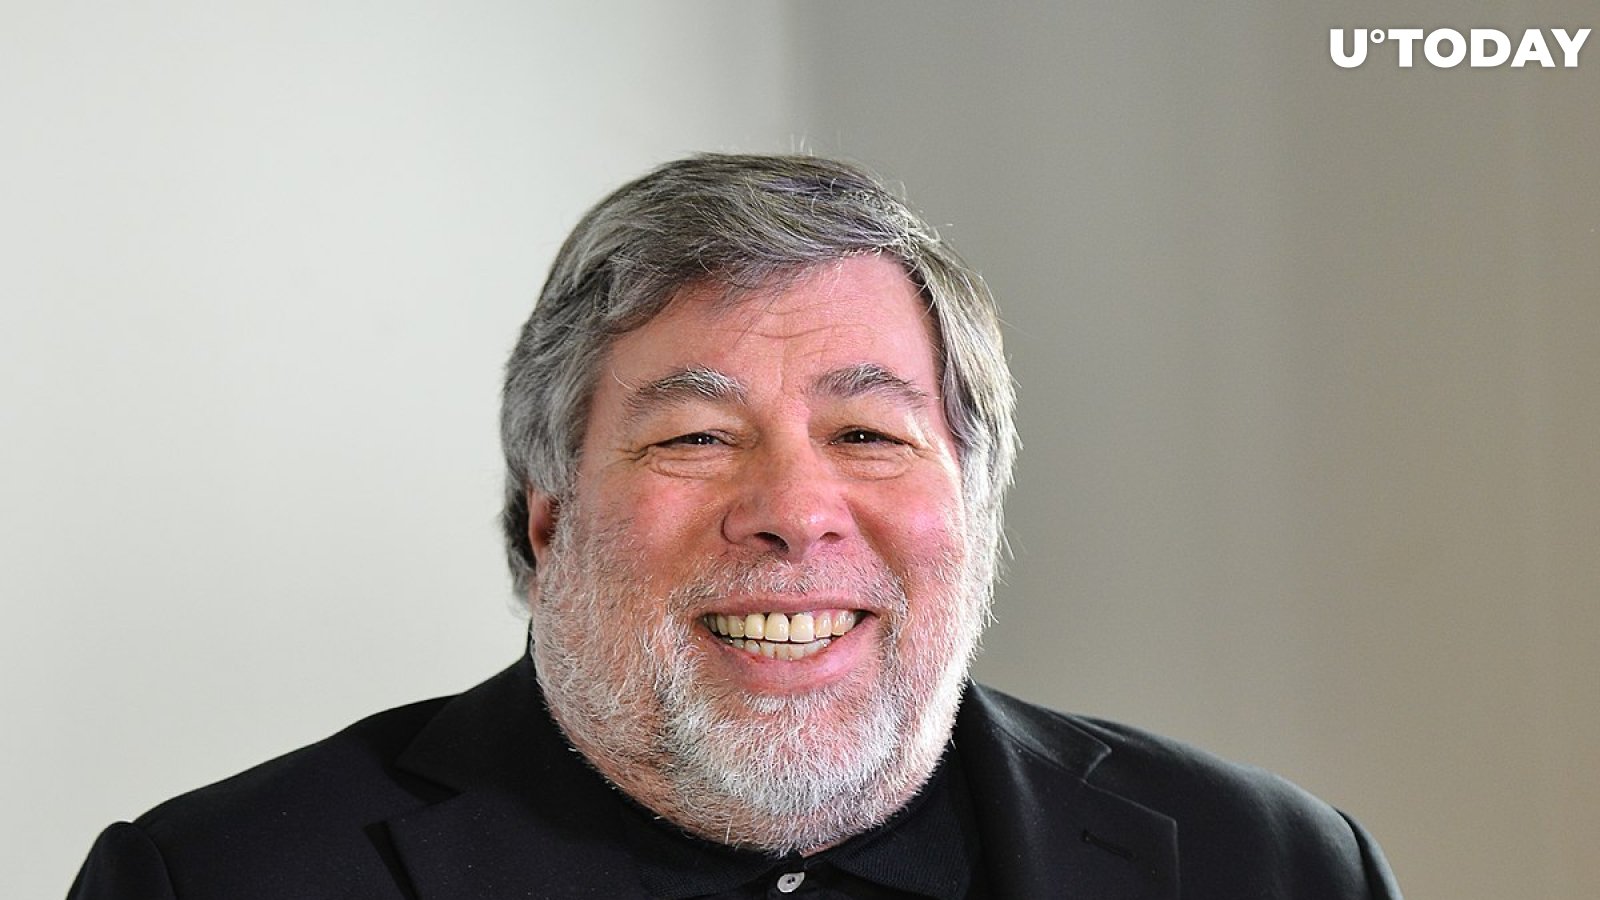 Apple Co-Founder Steve Wozniak Calls Bitcoin a "Miracle," Says It's Better Than Gold